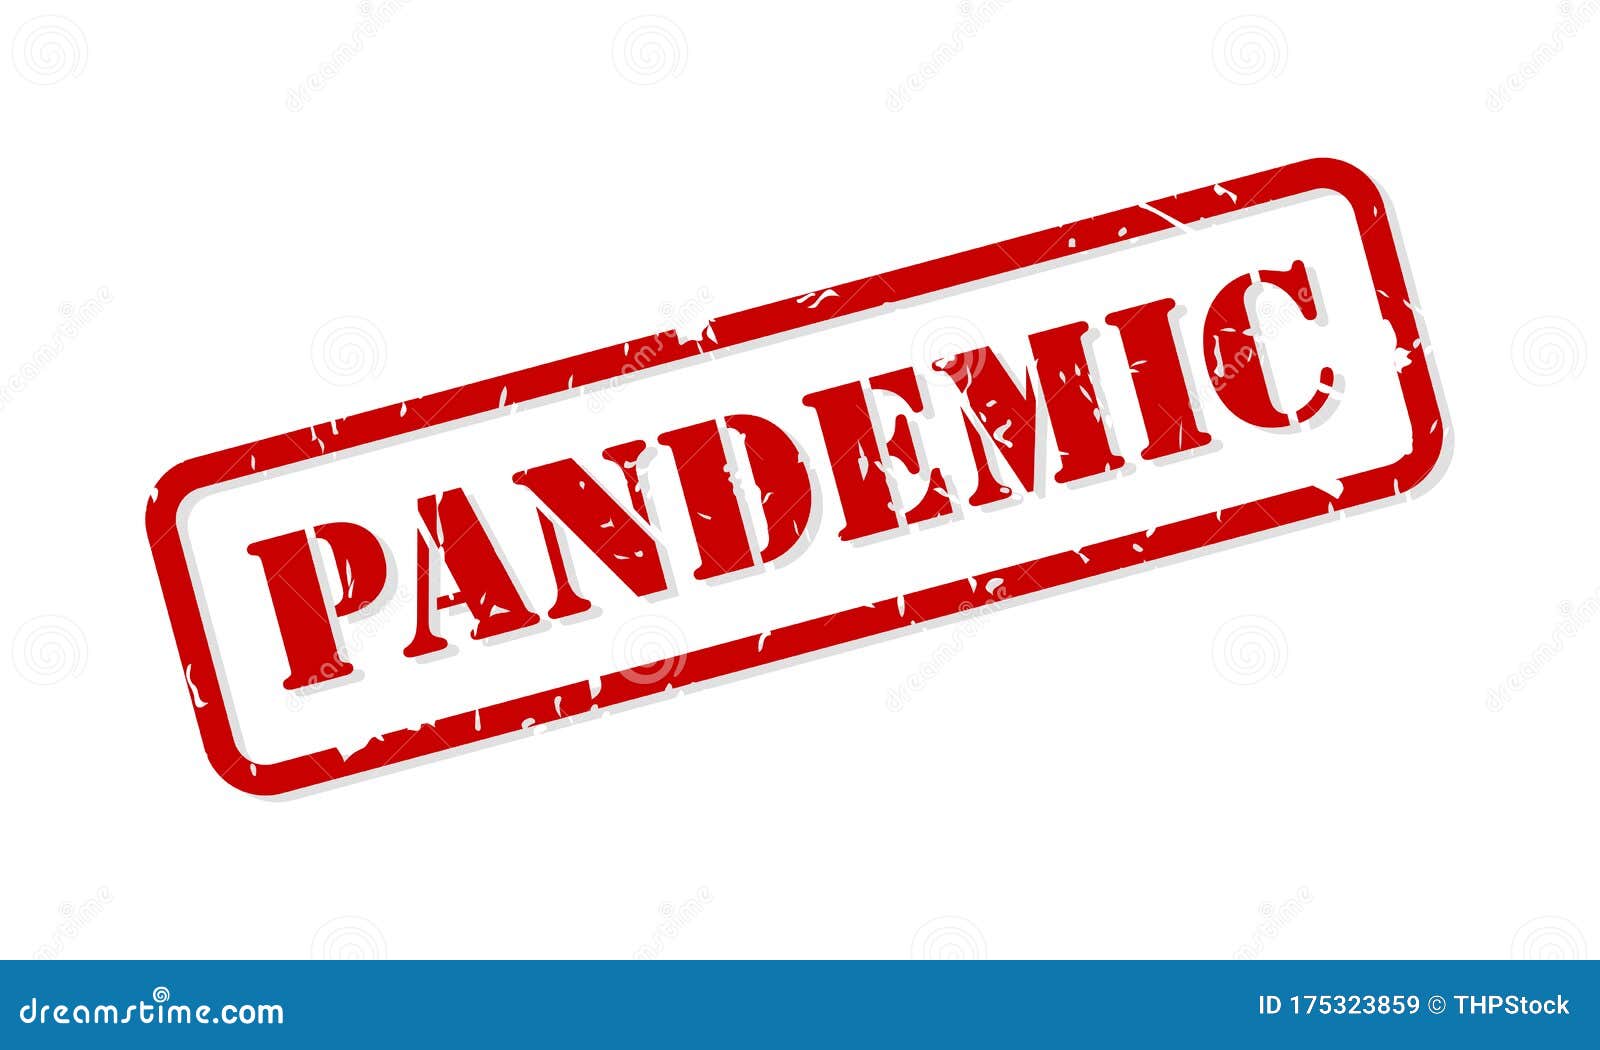 pandemic rubber stamp 